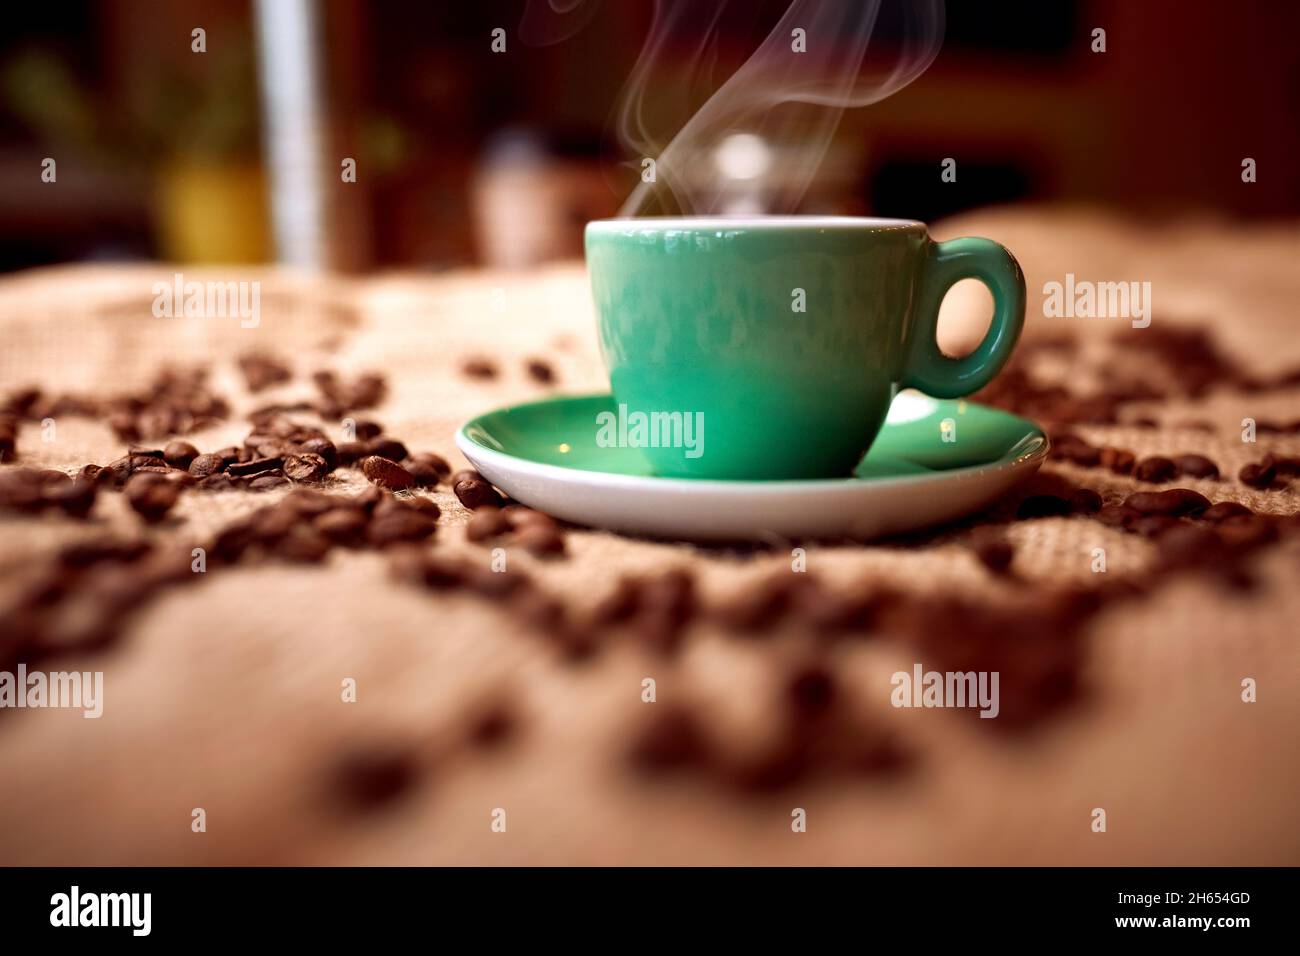 Close-up view of aromatic and fragrant hot coffee cup and coffee beans on the bag. Coffee, beverage Stock Photo